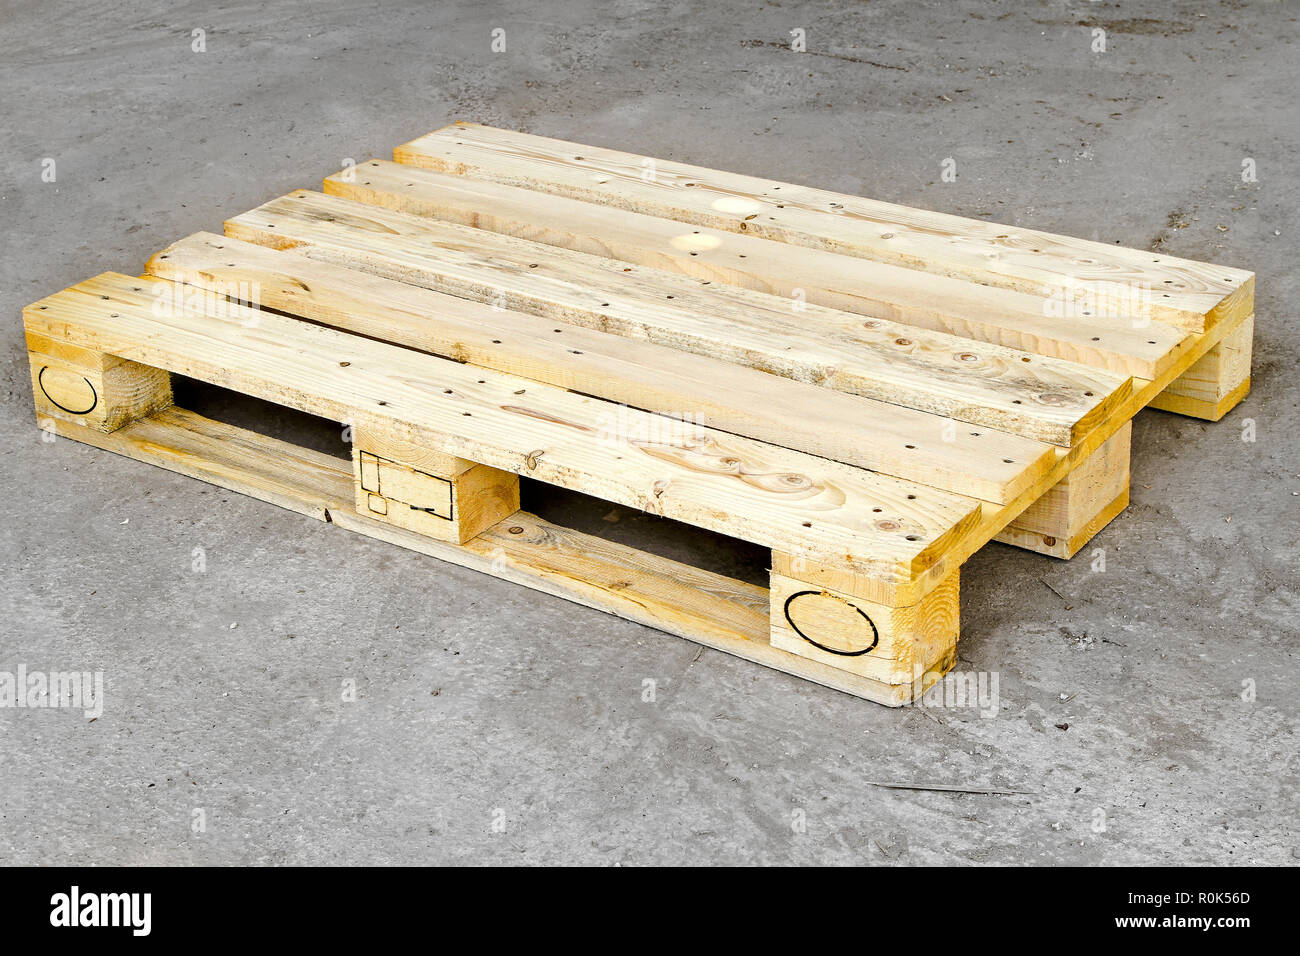 Cargo Wooden Euro Pallet In Standard Dimensions Stock Photo